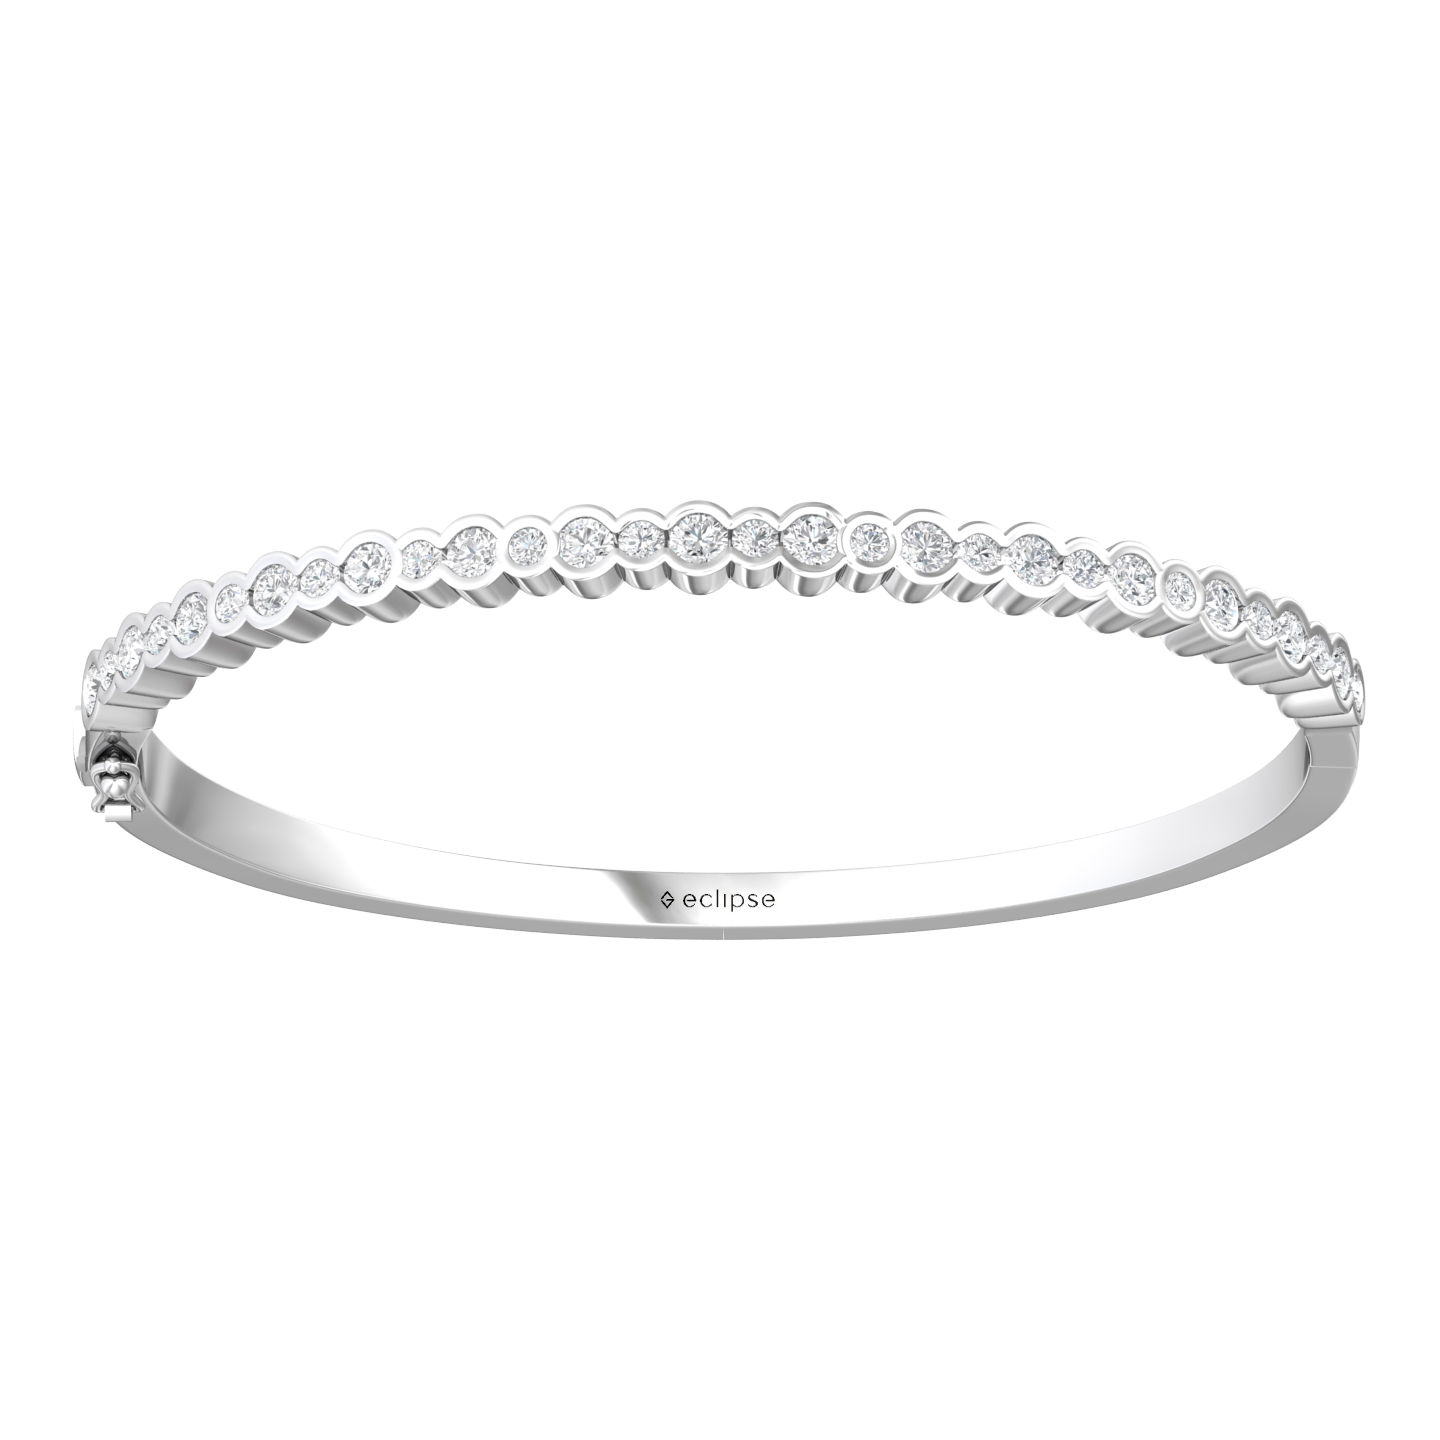 Eclipse Collection All Diamond Bangle  Gardiner Brothers   